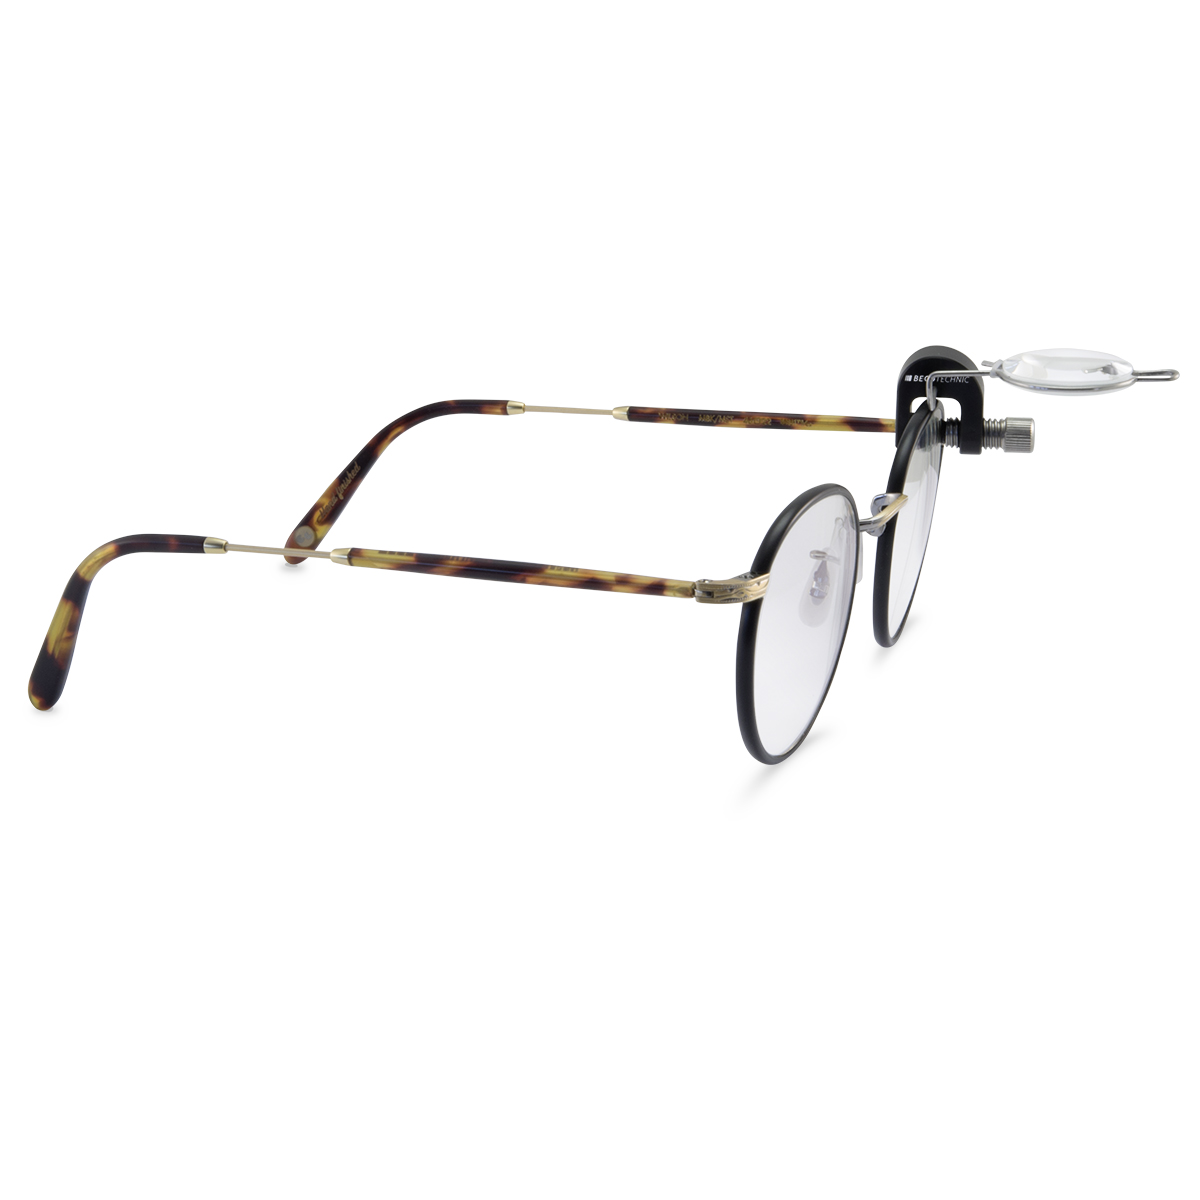 Magnifying glass for spectacles, 10x, right